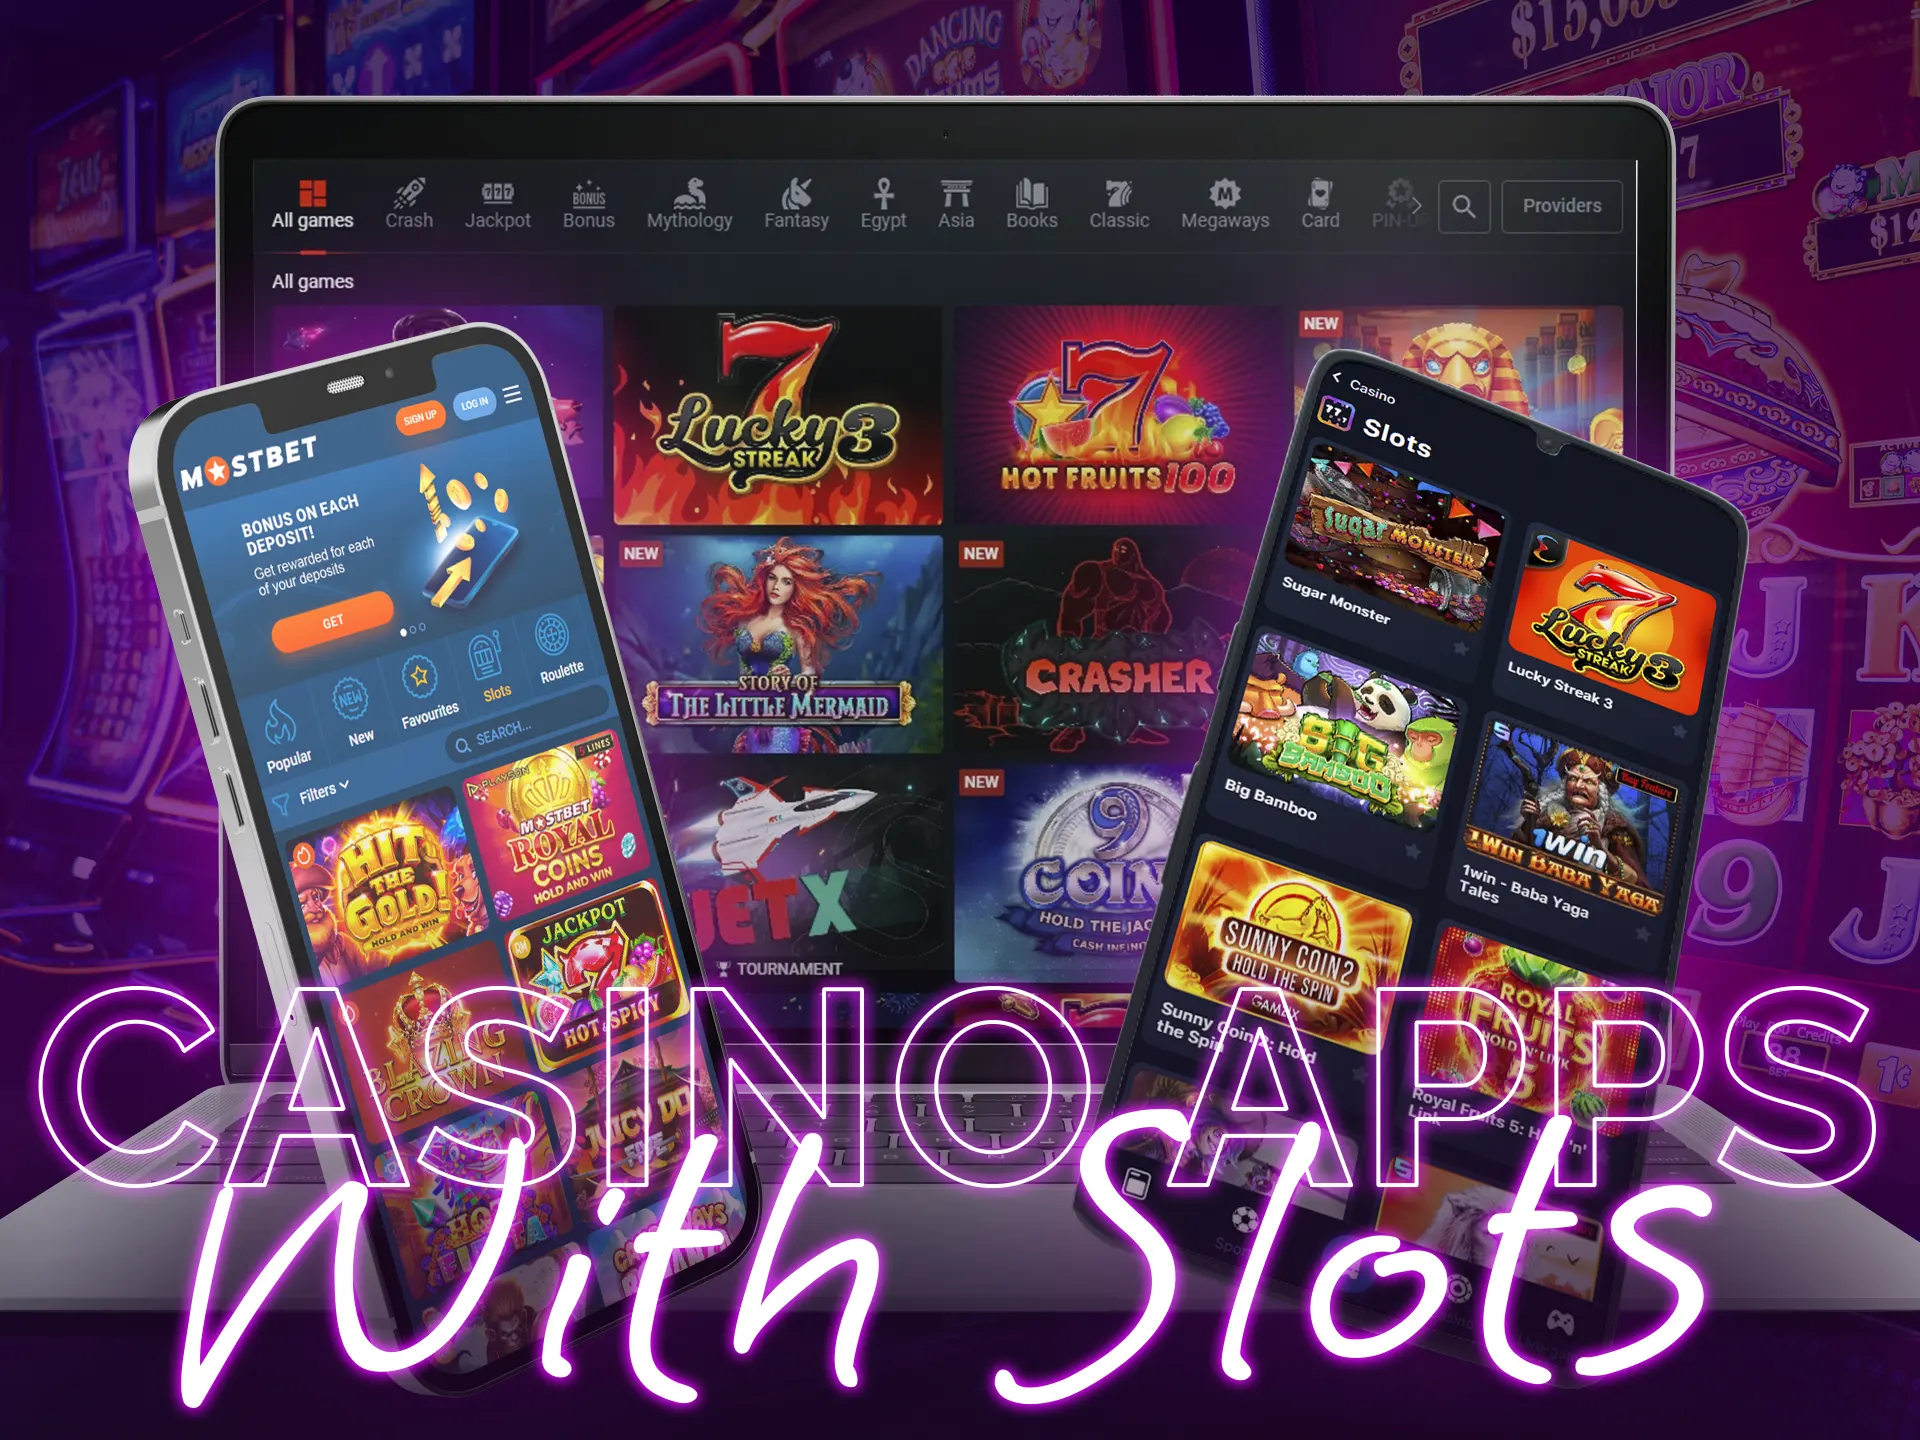 You can also play exciting slots from your phone via apps.